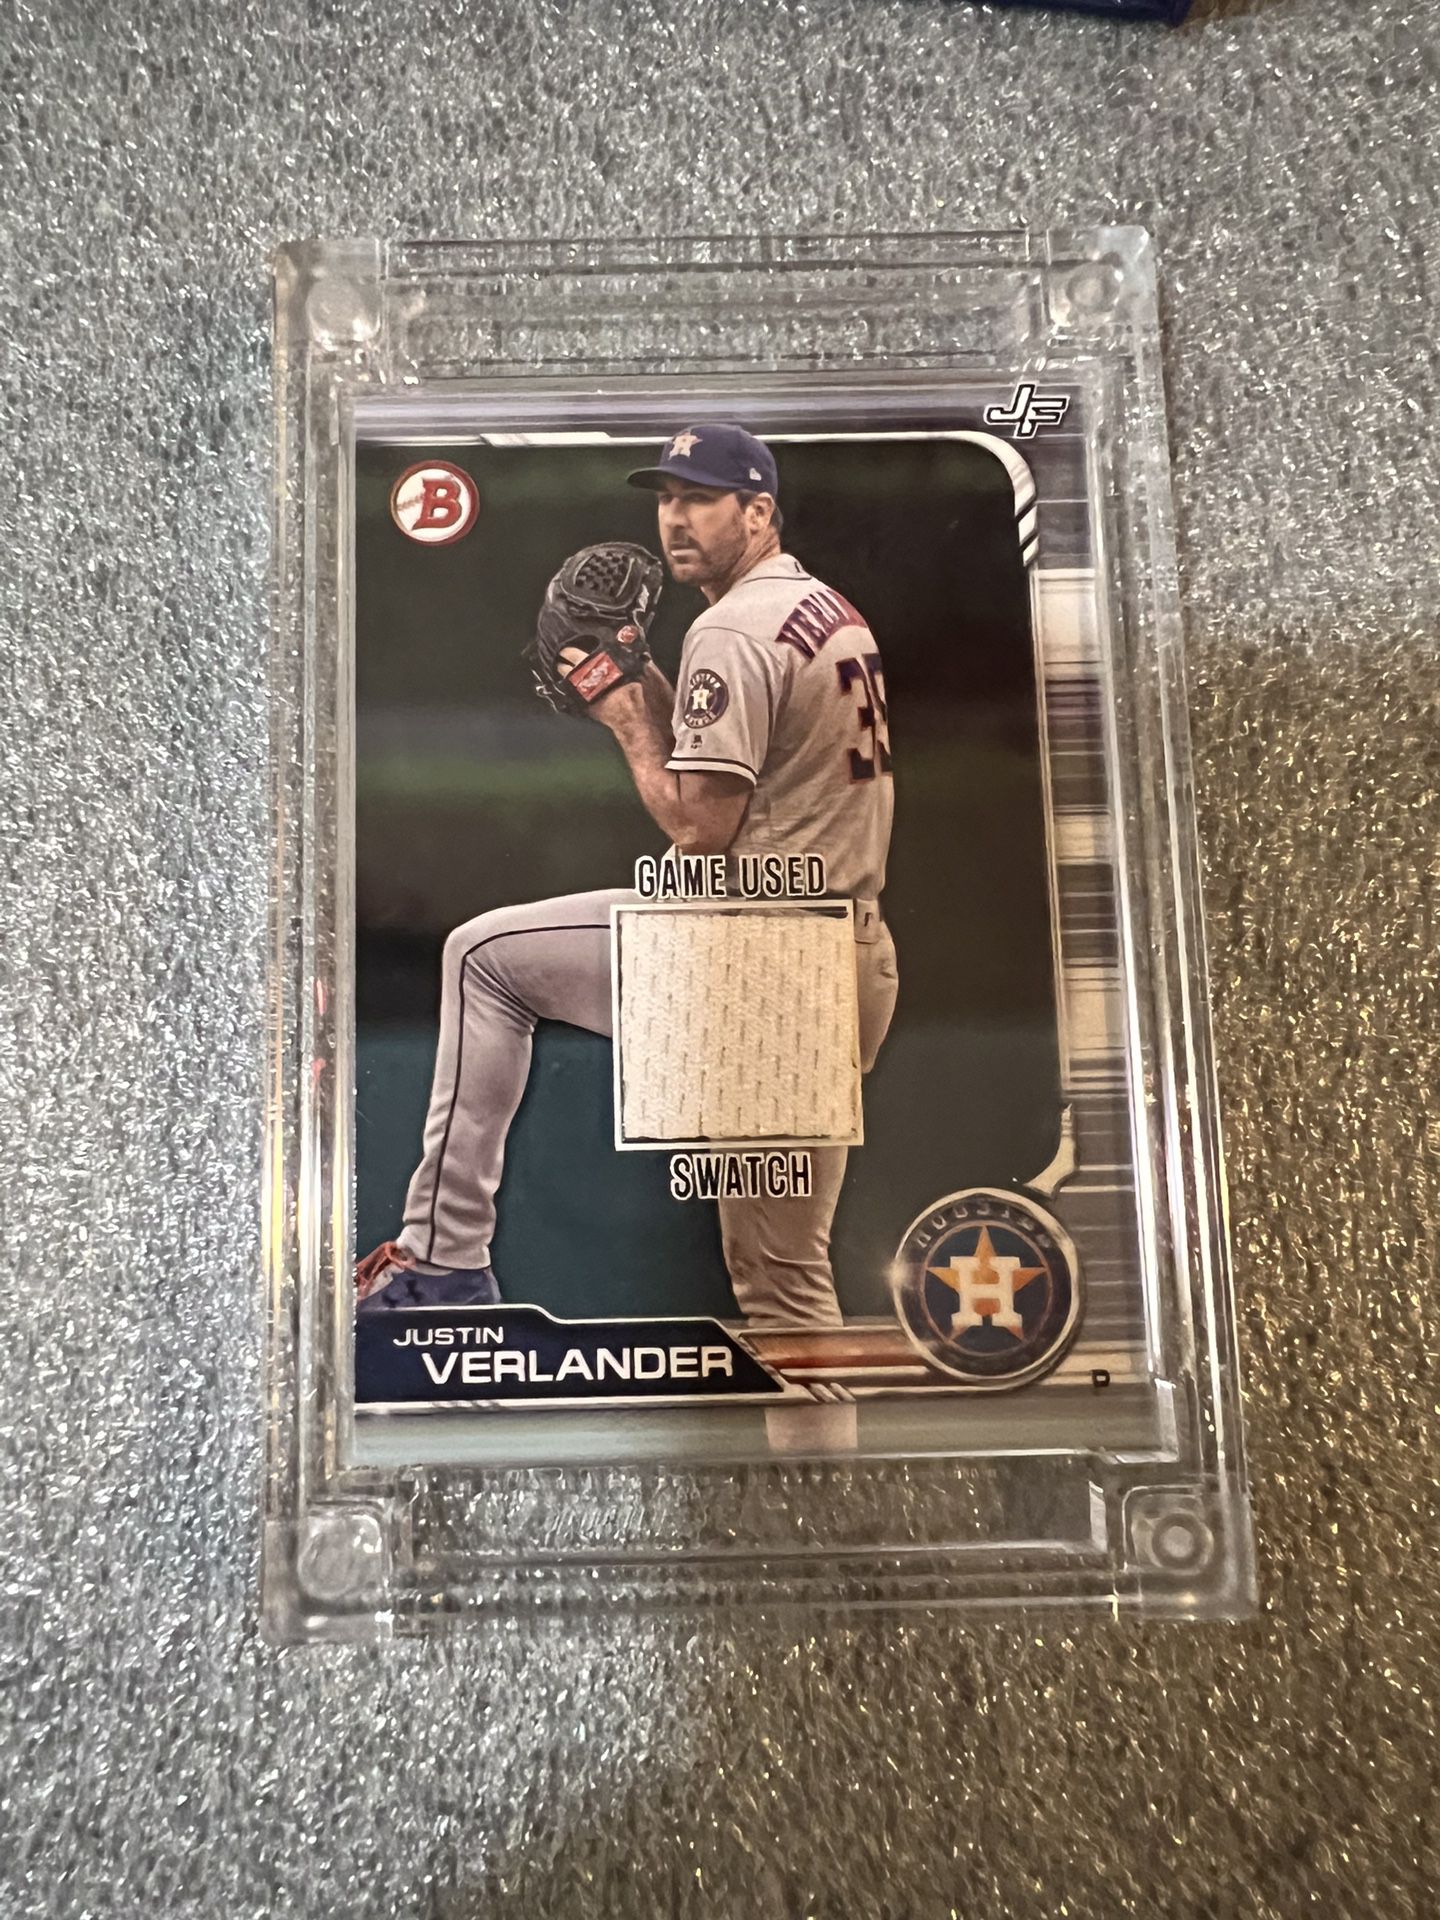 Justin Verlander Jersey Fusion Baseball Card With A Swatch Of Game Worn  Jersey for Sale in Los Angeles, CA - OfferUp